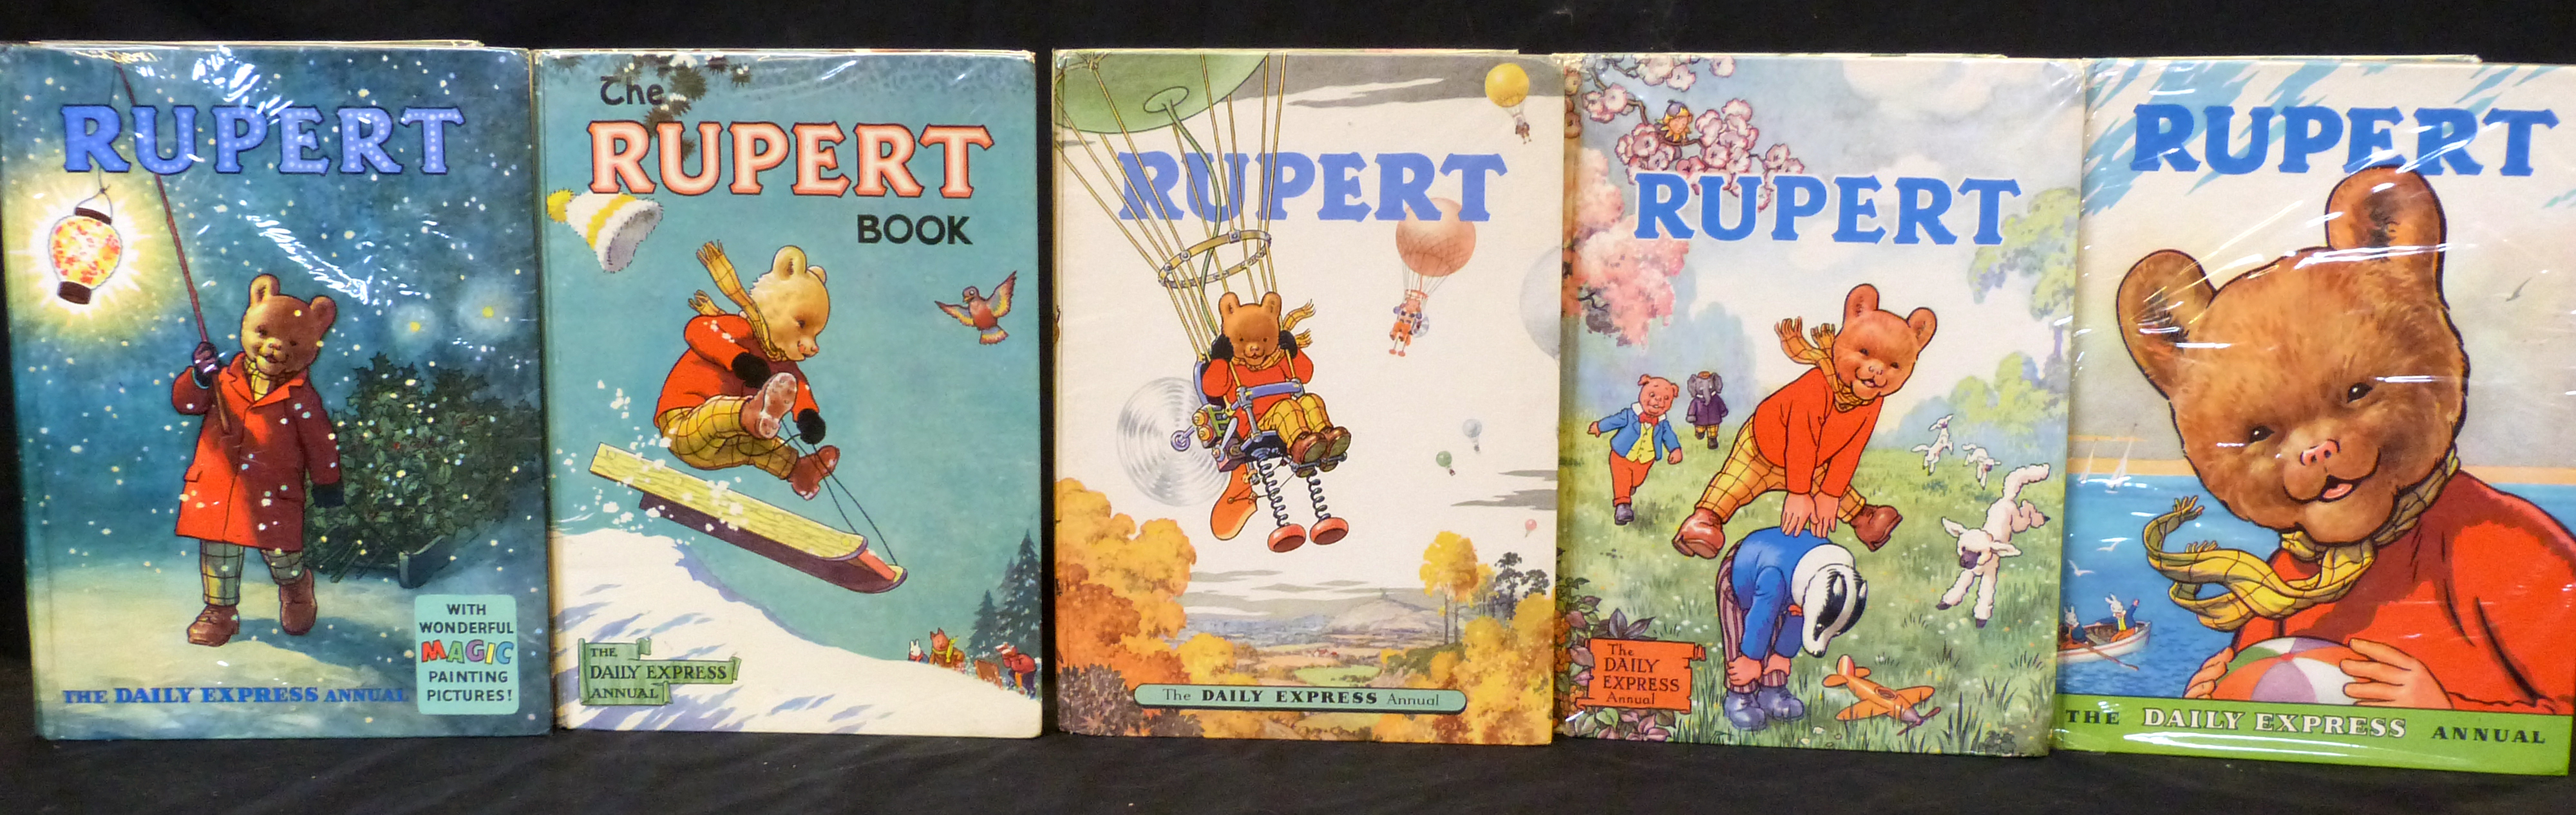 RUPERT ANNUAL, [1951-57], 1958-60, 10 vols, 4to, original pictorial boards, mainly vgc (10)